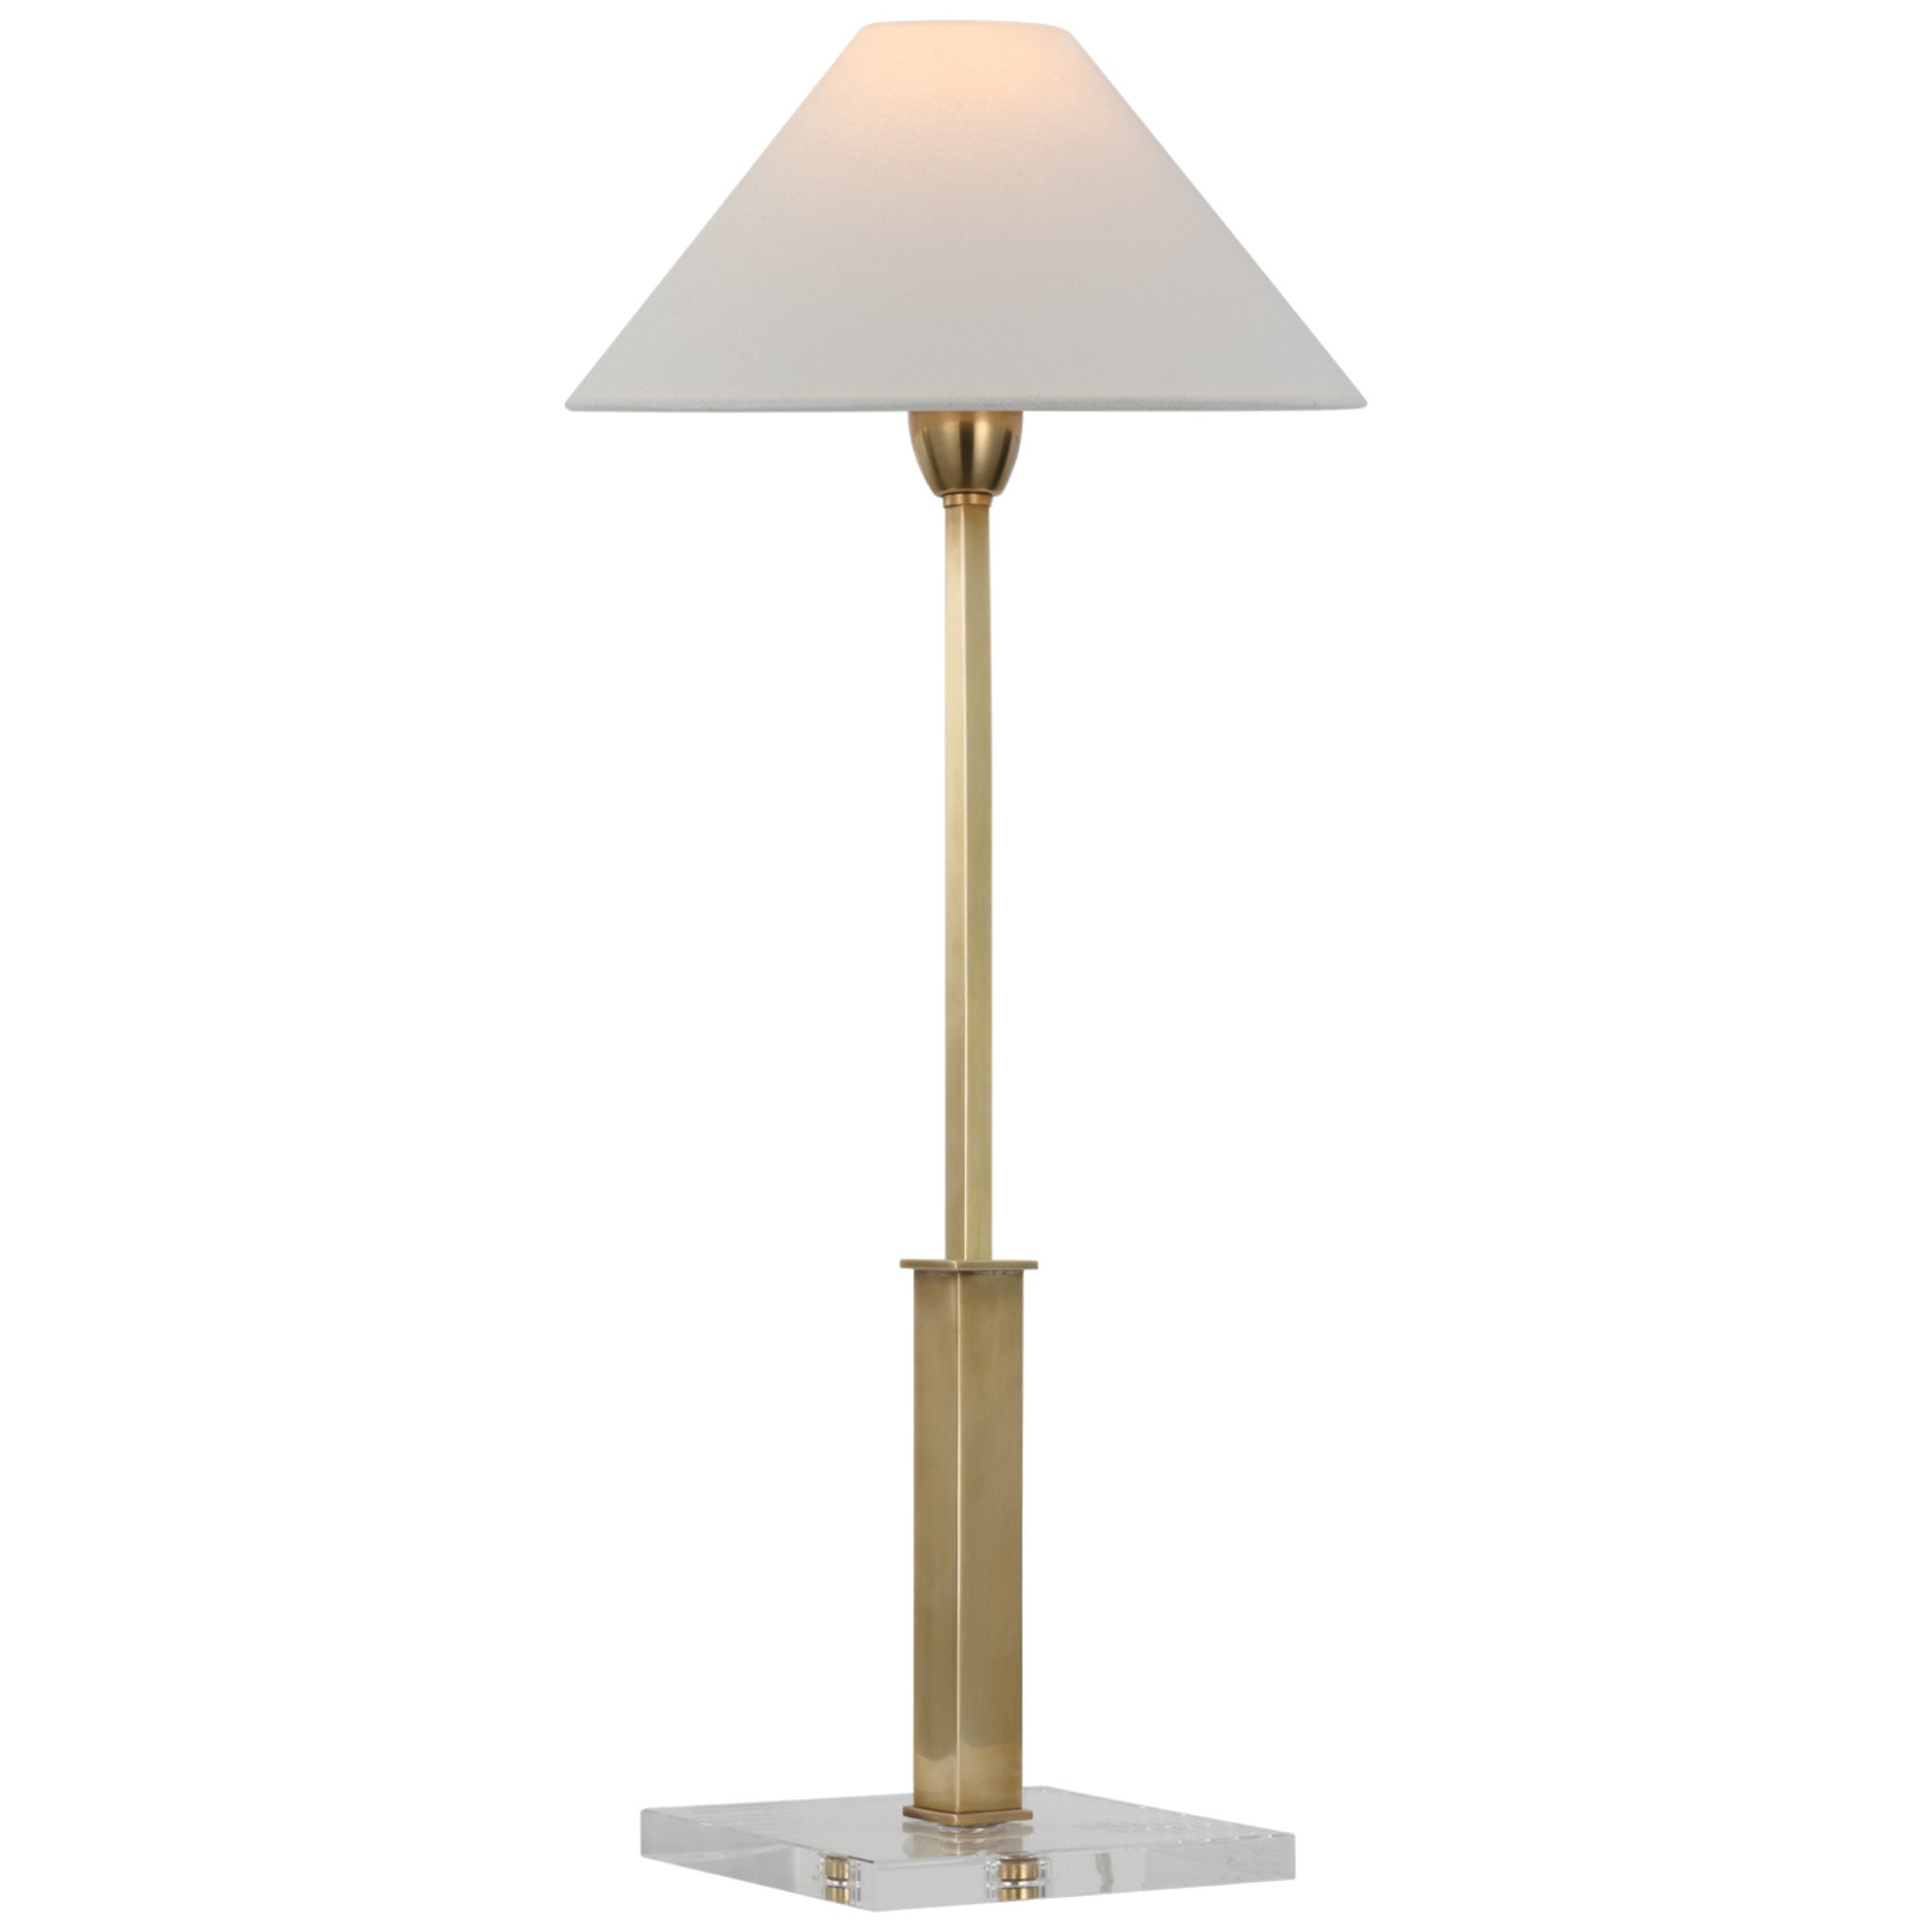 J. Randall Powers Asher Table Lamp in Hand-Rubbed Antique Brass and Crystal with Linen Shade